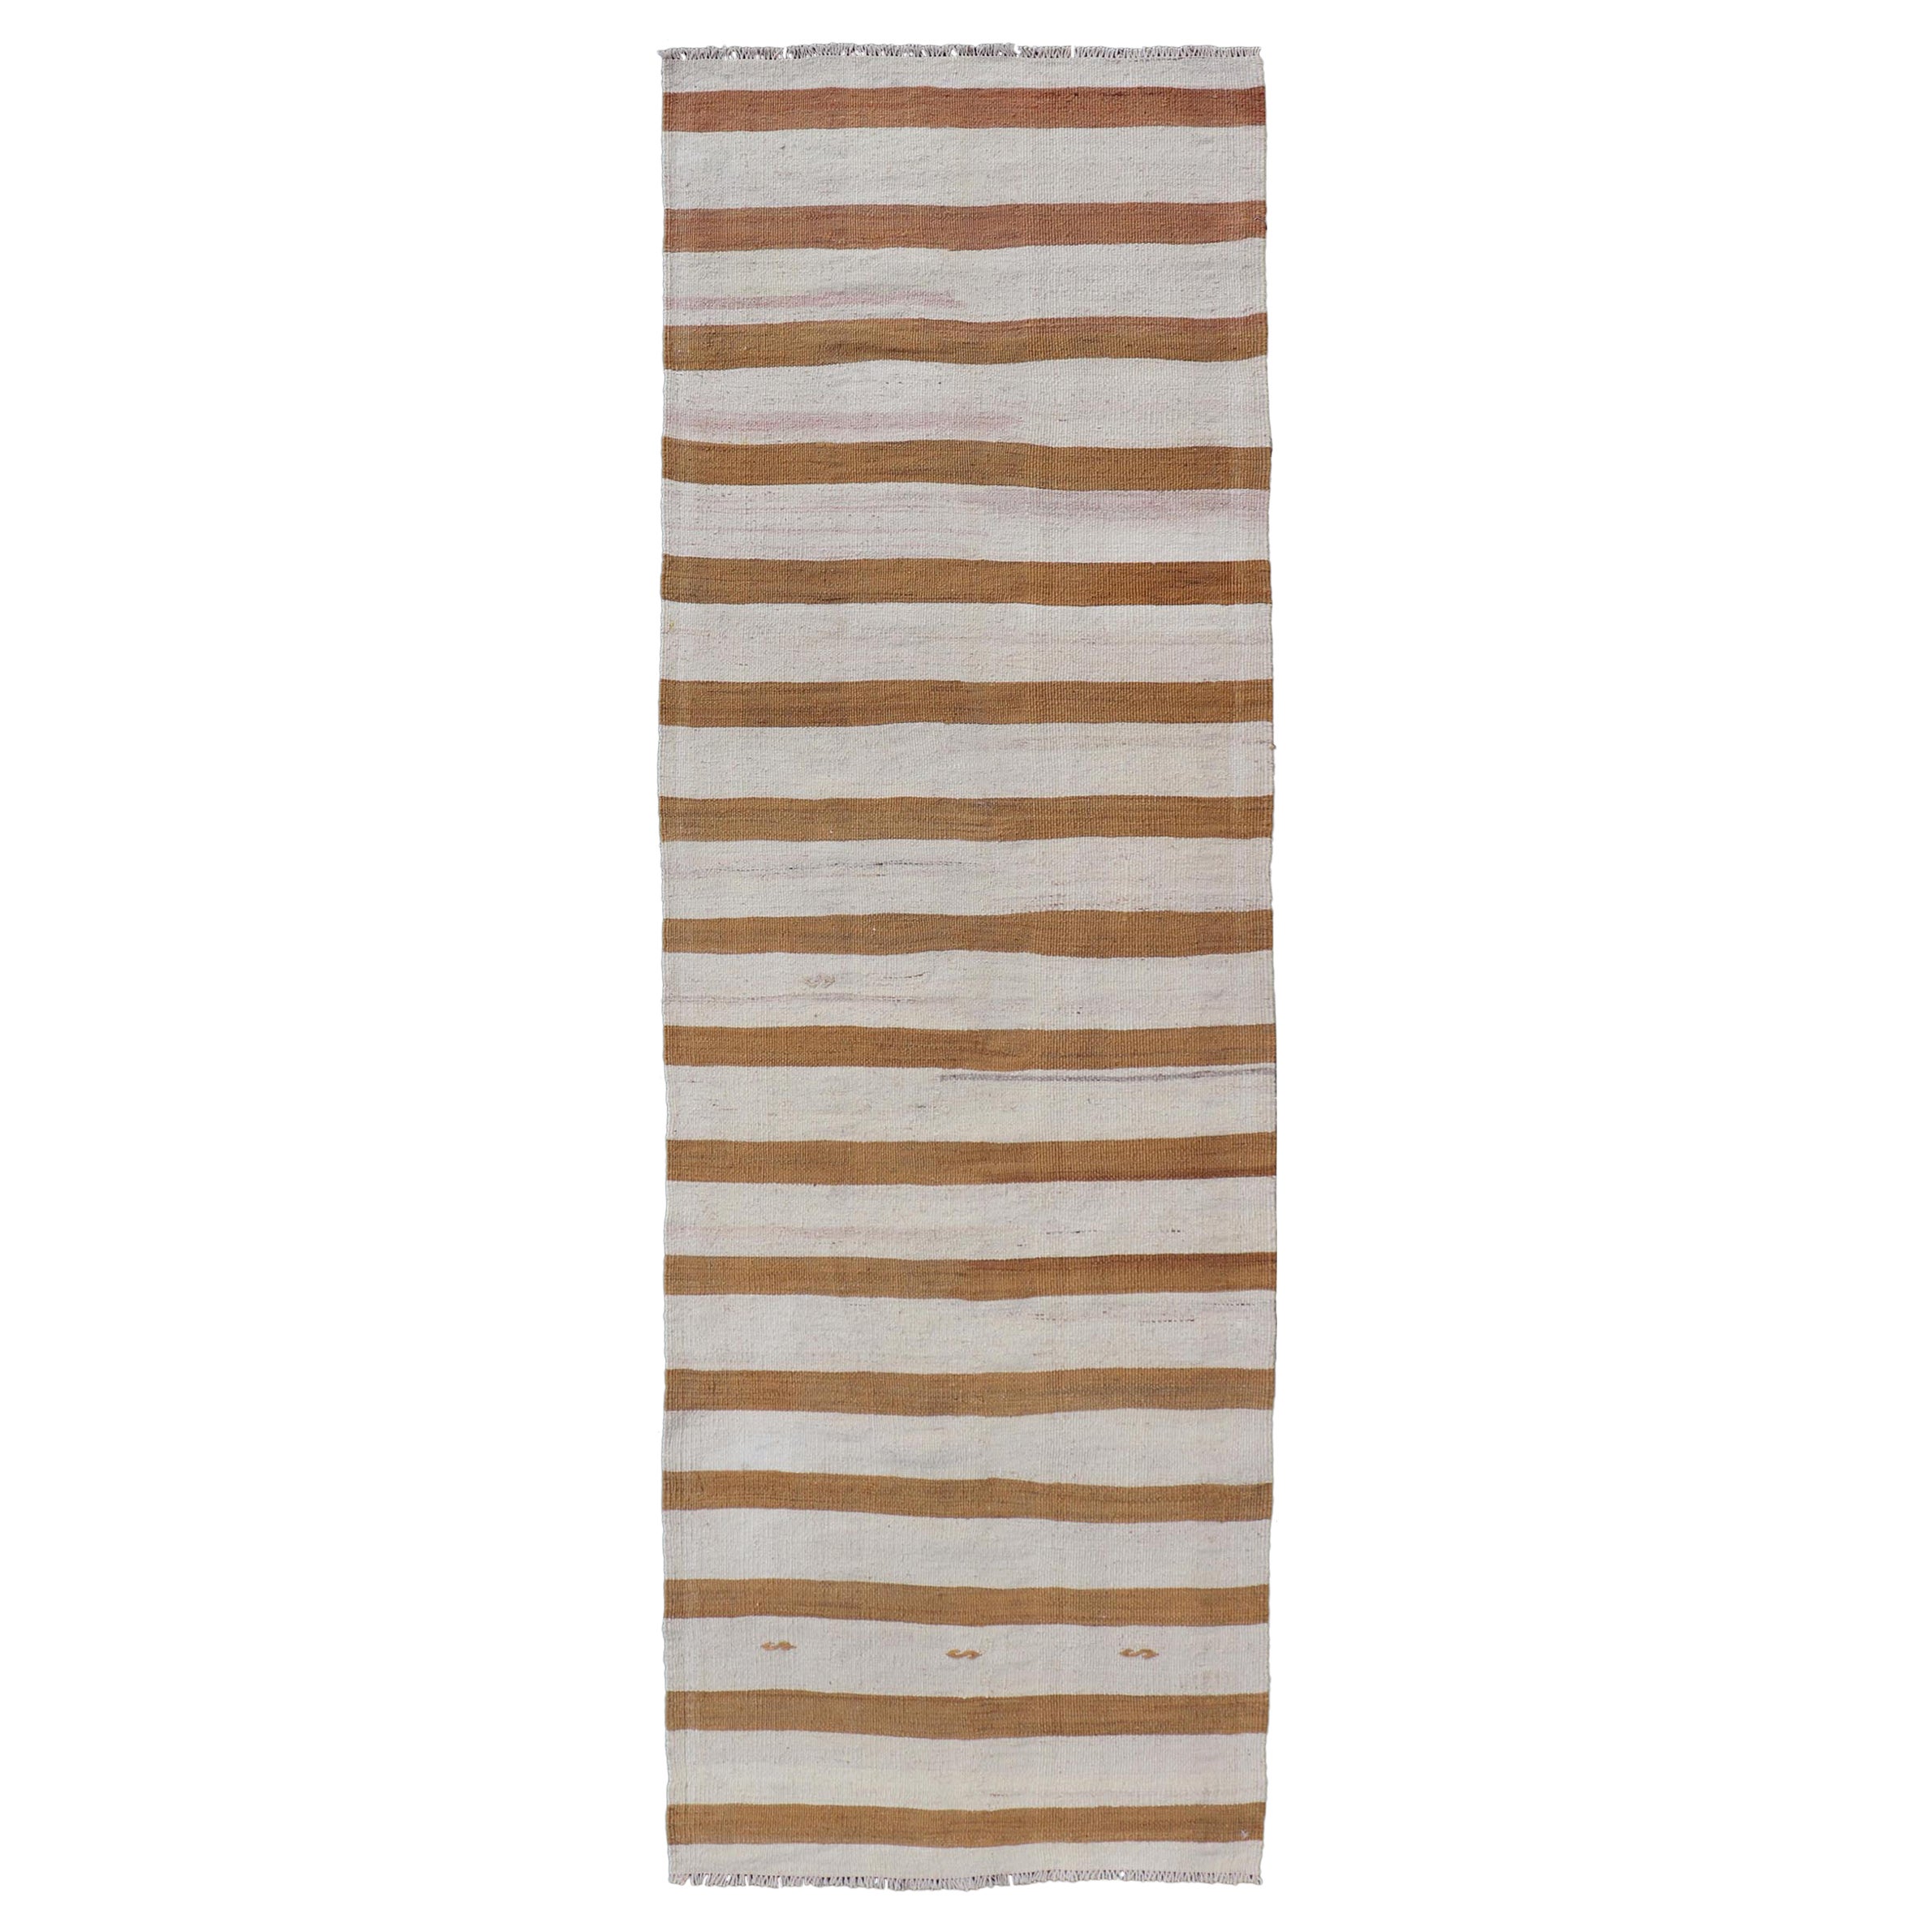 Vintage Turkish Kilim Rug with Horizontal Stripes in Light Brown and Cream